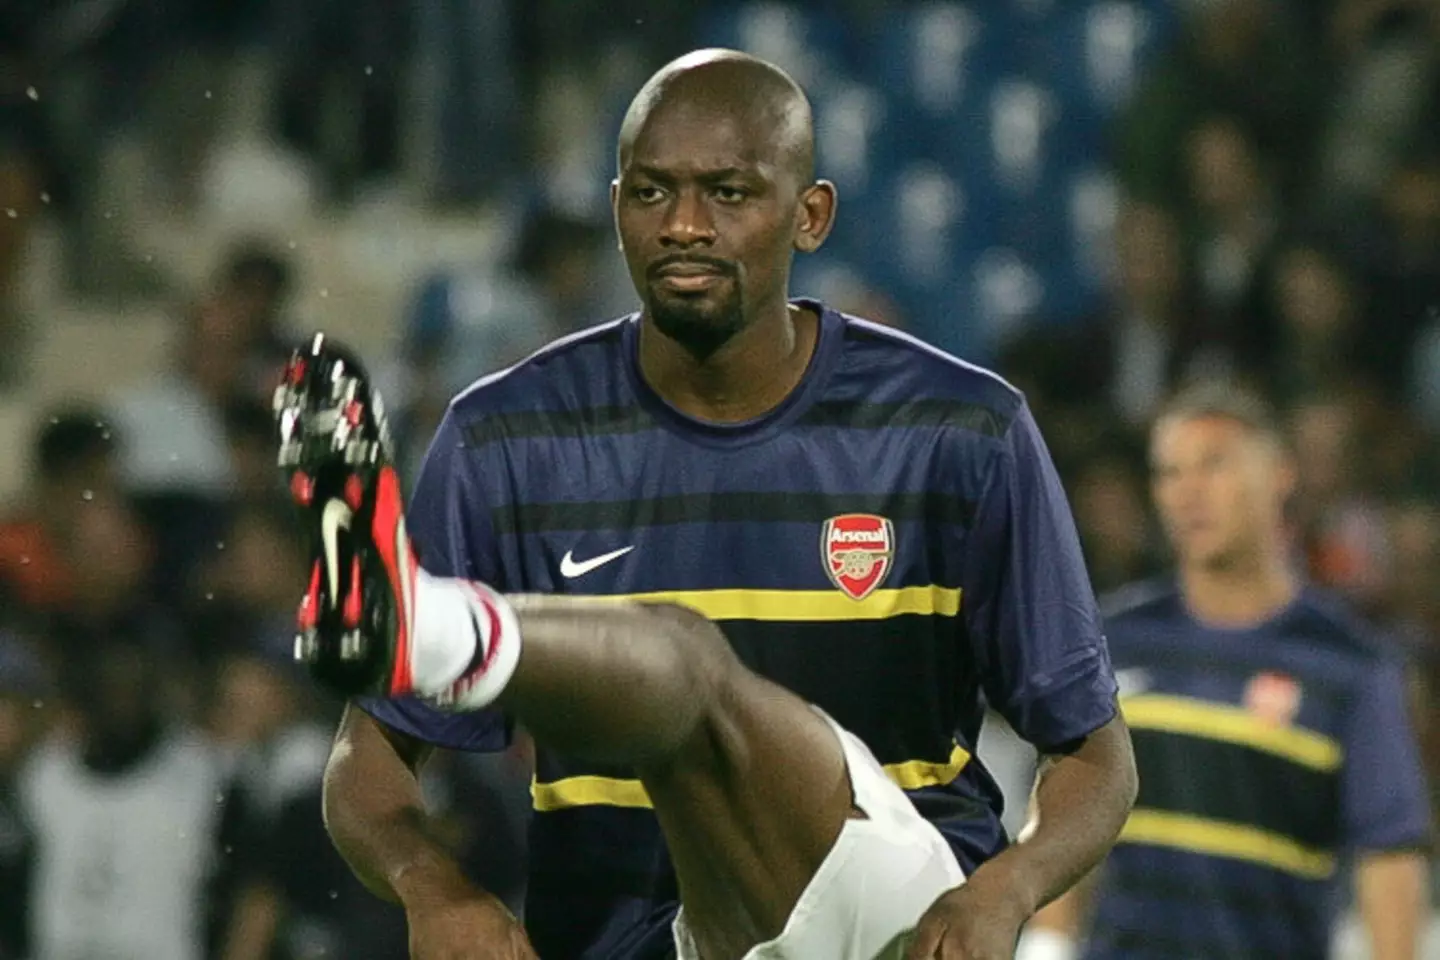 Diaby spent nine years at Arsenal. (Image